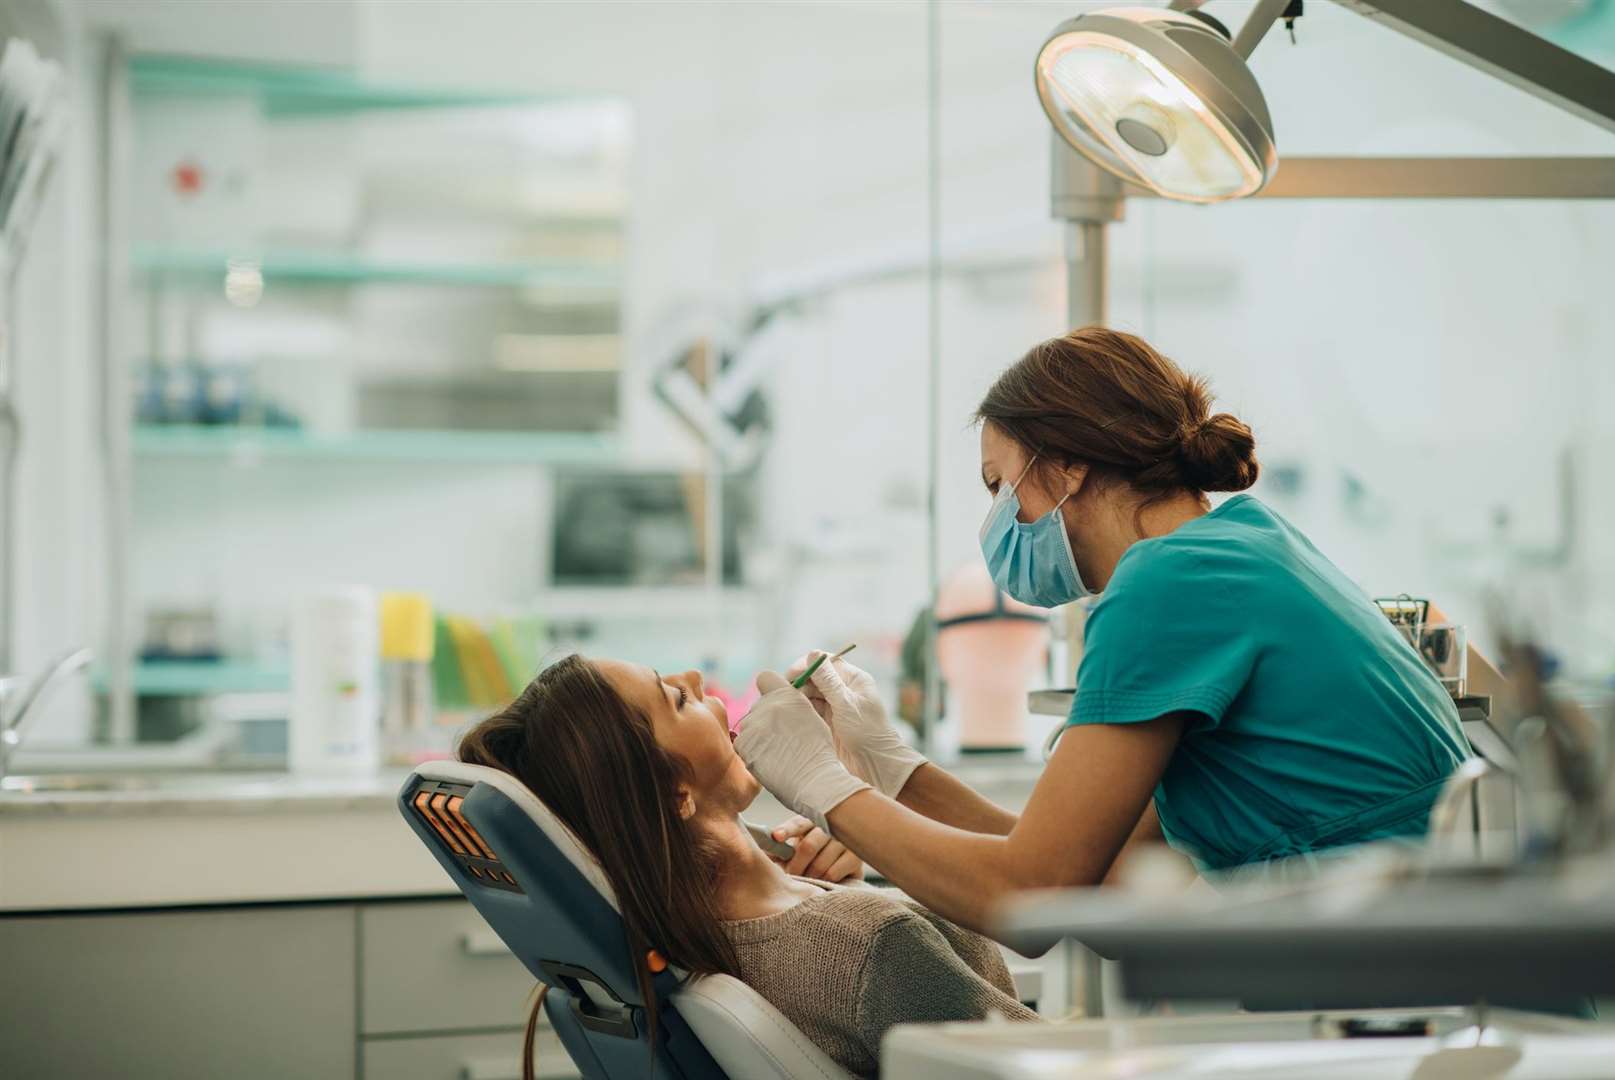 Dentists will get extra money for treating patients who haven’t seen an NHS dentist in two years. Image: iStock.